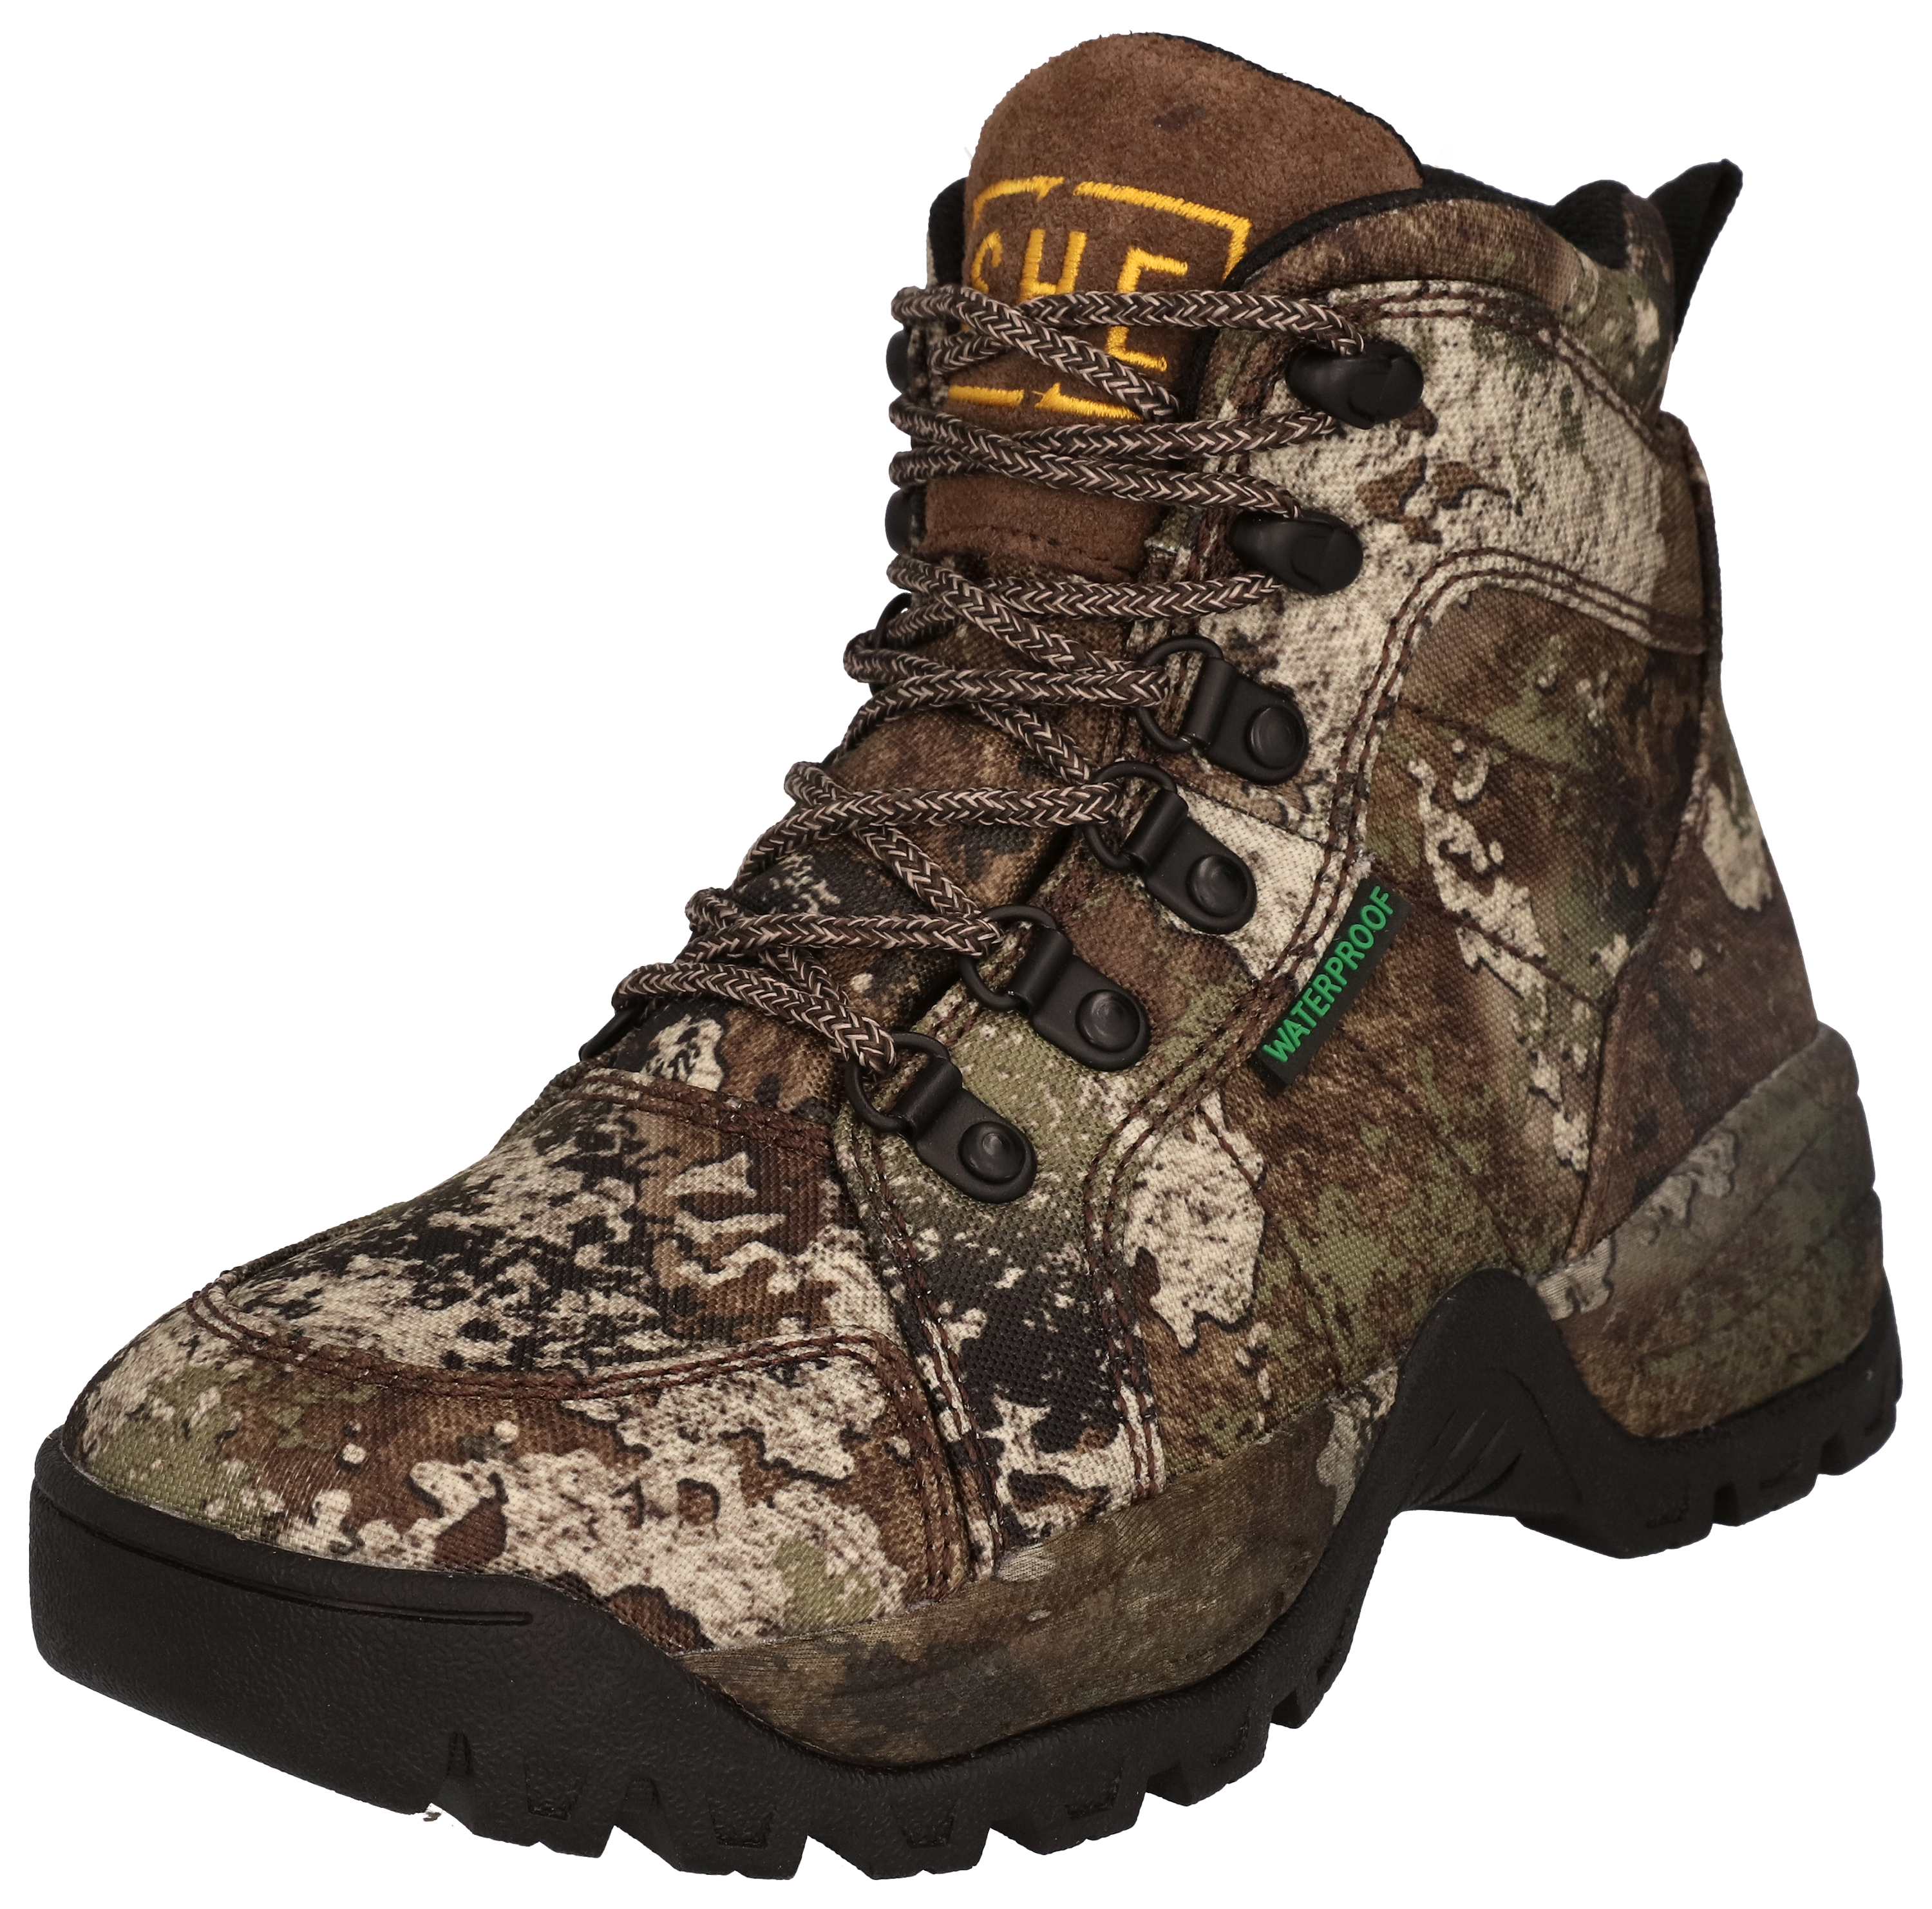 SHE Outdoor Timber Buck Waterproof Hunting Boots for Ladies - TrueTimber Strata - 7M